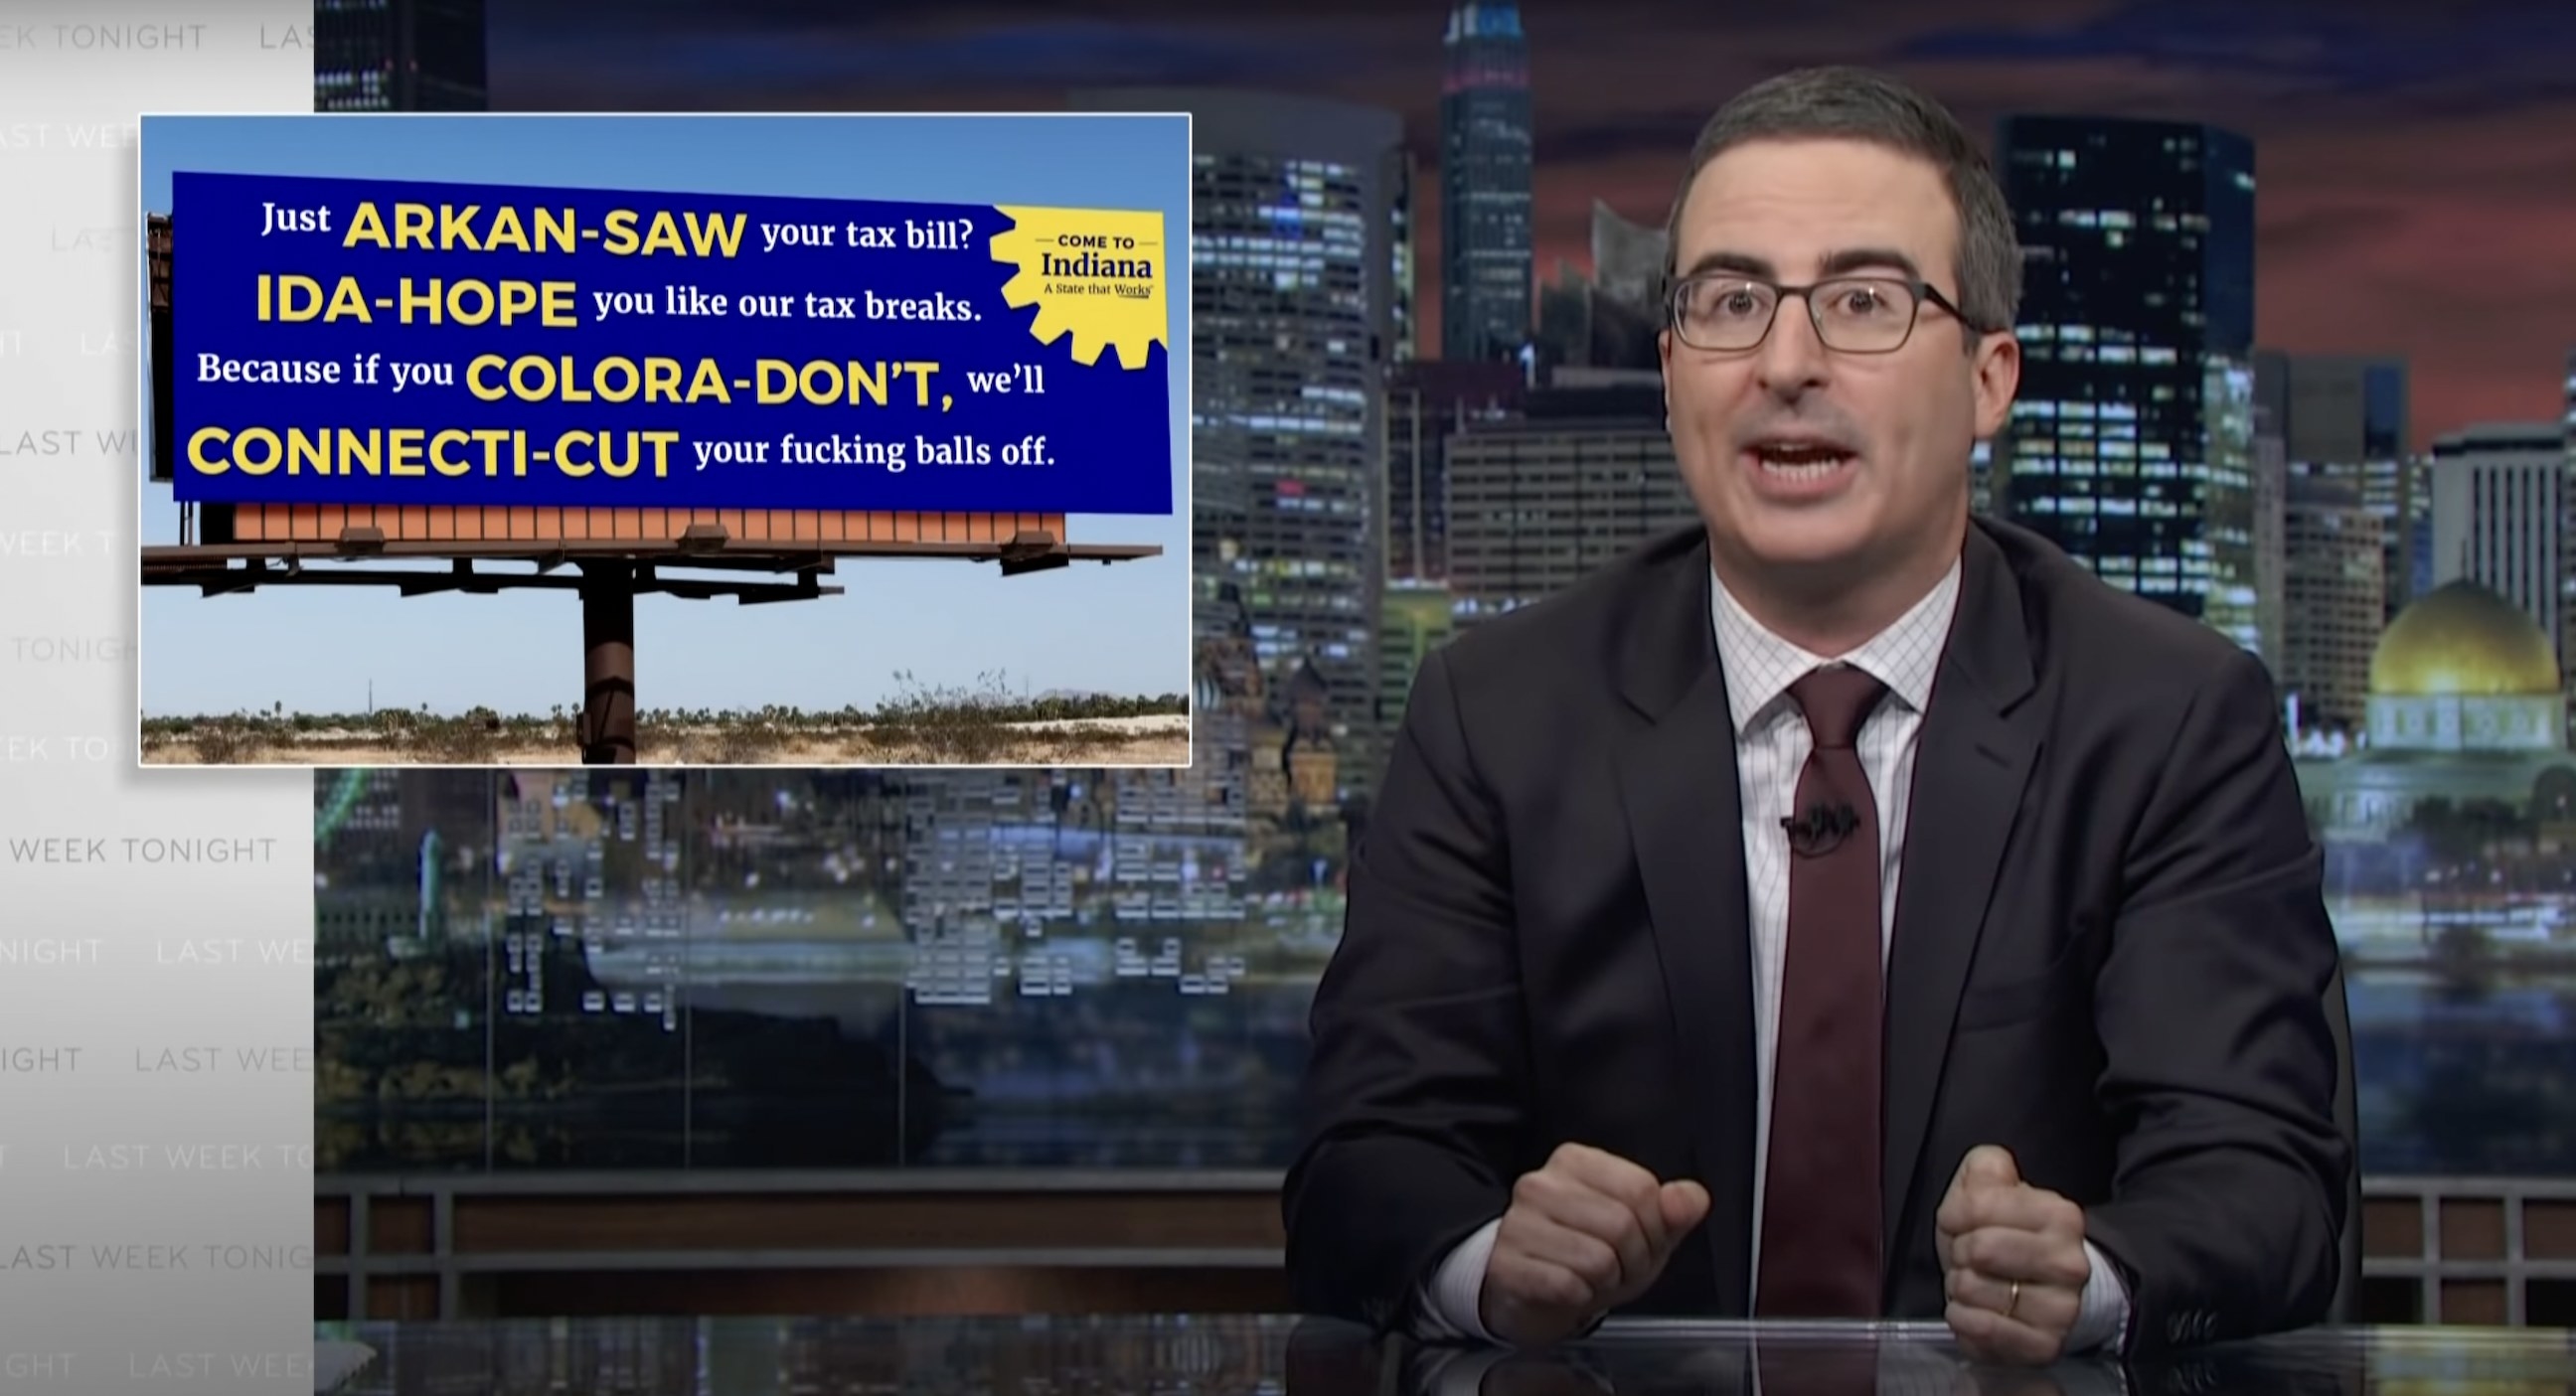 John Oliver at his desk, with an image next to him of a billboard that says, Just Arkan saw your tax bill question mark, Ida hope you like our tax breaks, because if you Colora dont, well Connecti cut your fucking balls off